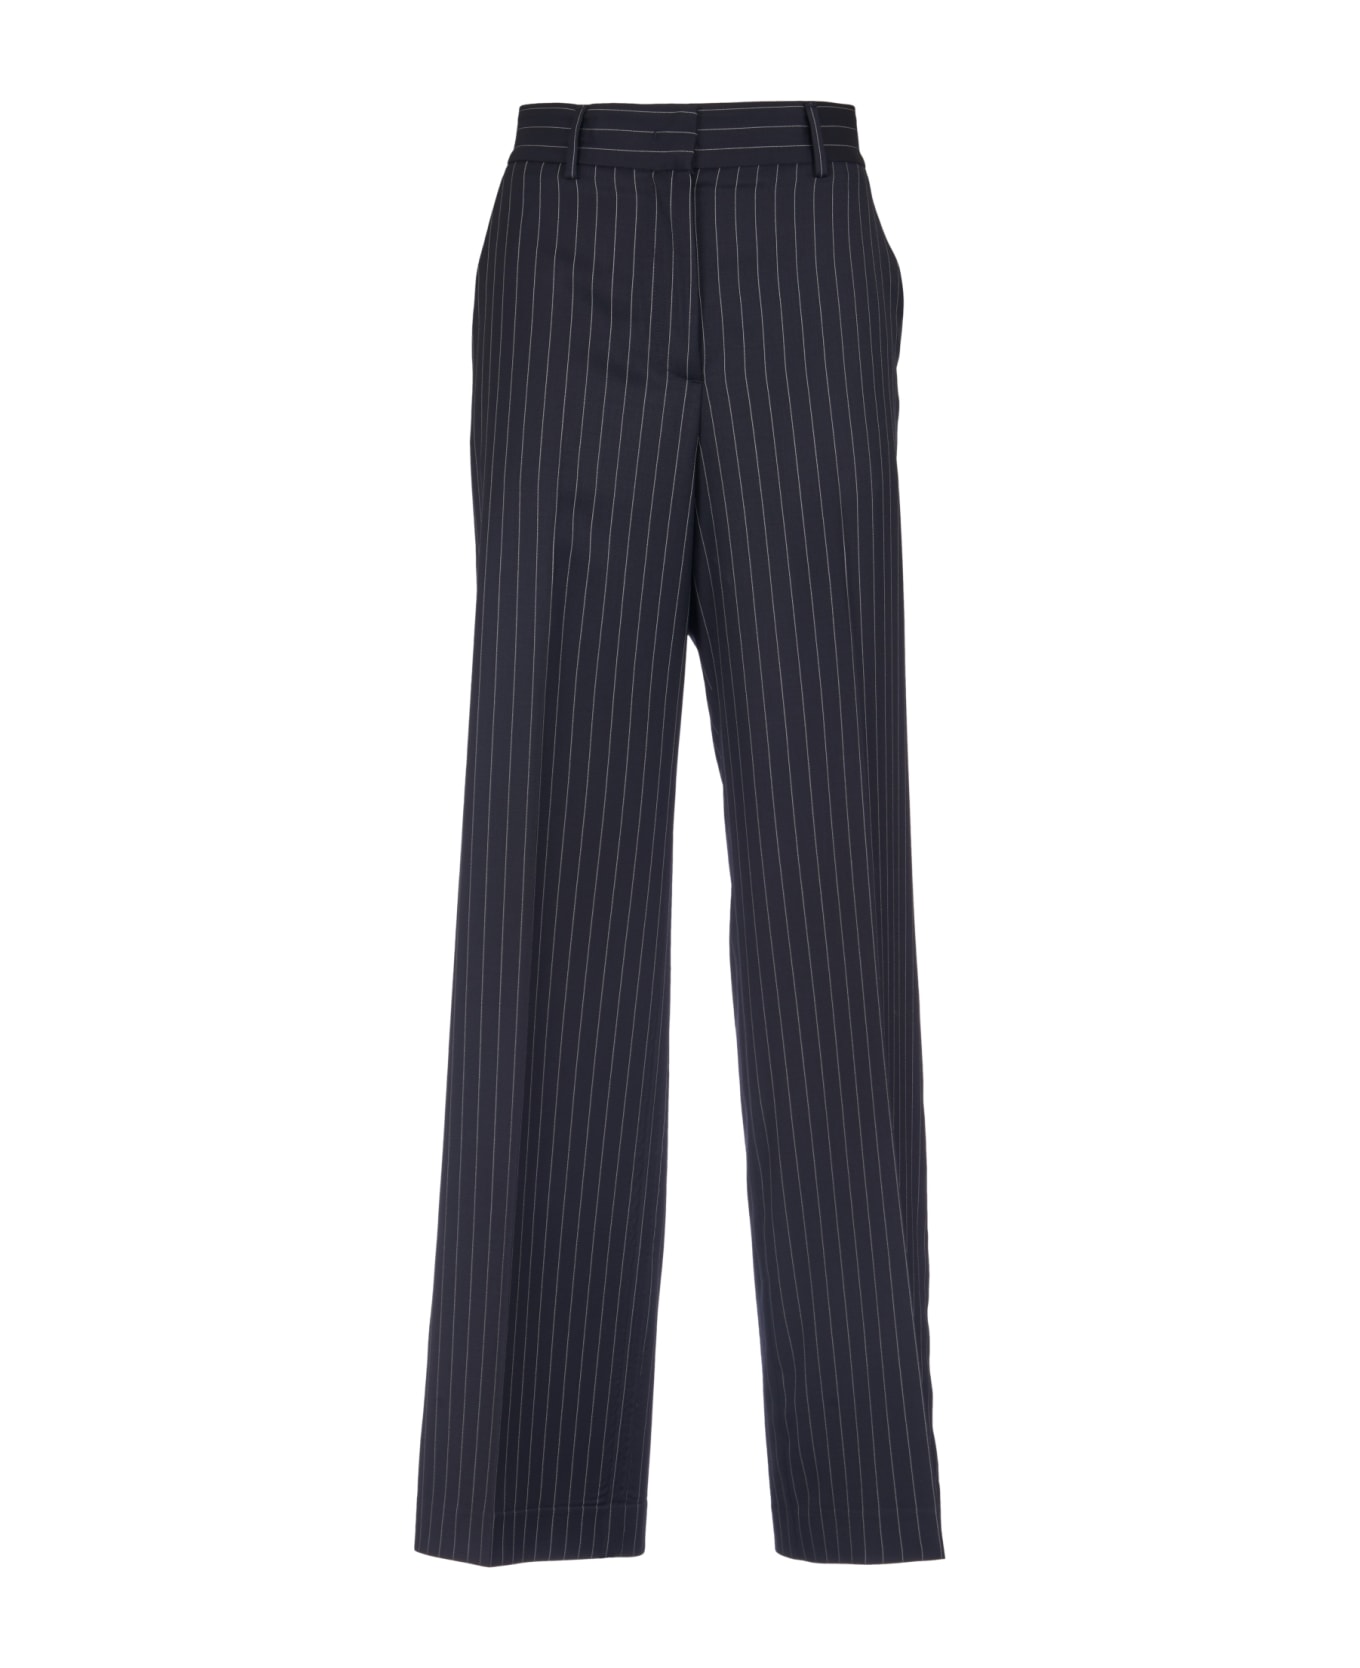 MSGM Pinstripe Trousers - Navy ボトムス